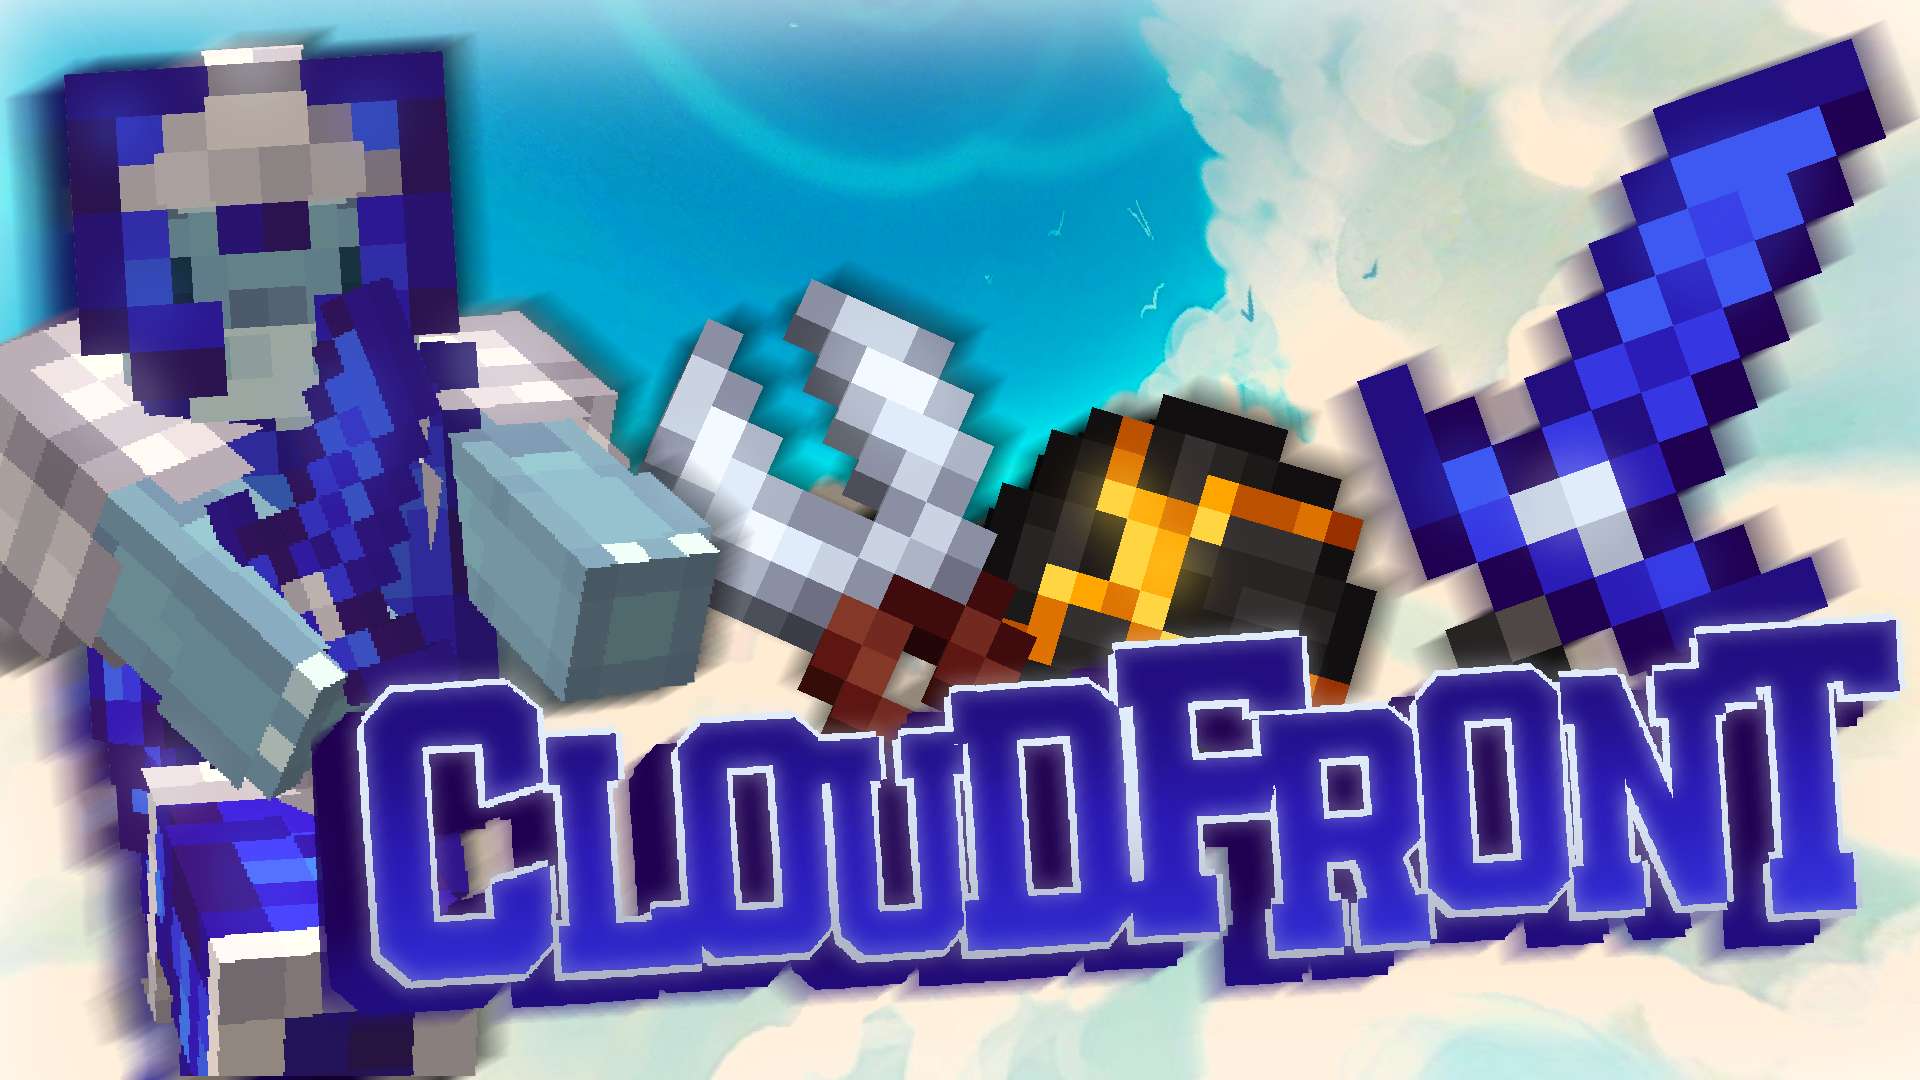 Cloudfront 16x by Wyvernishpacks on PvPRP